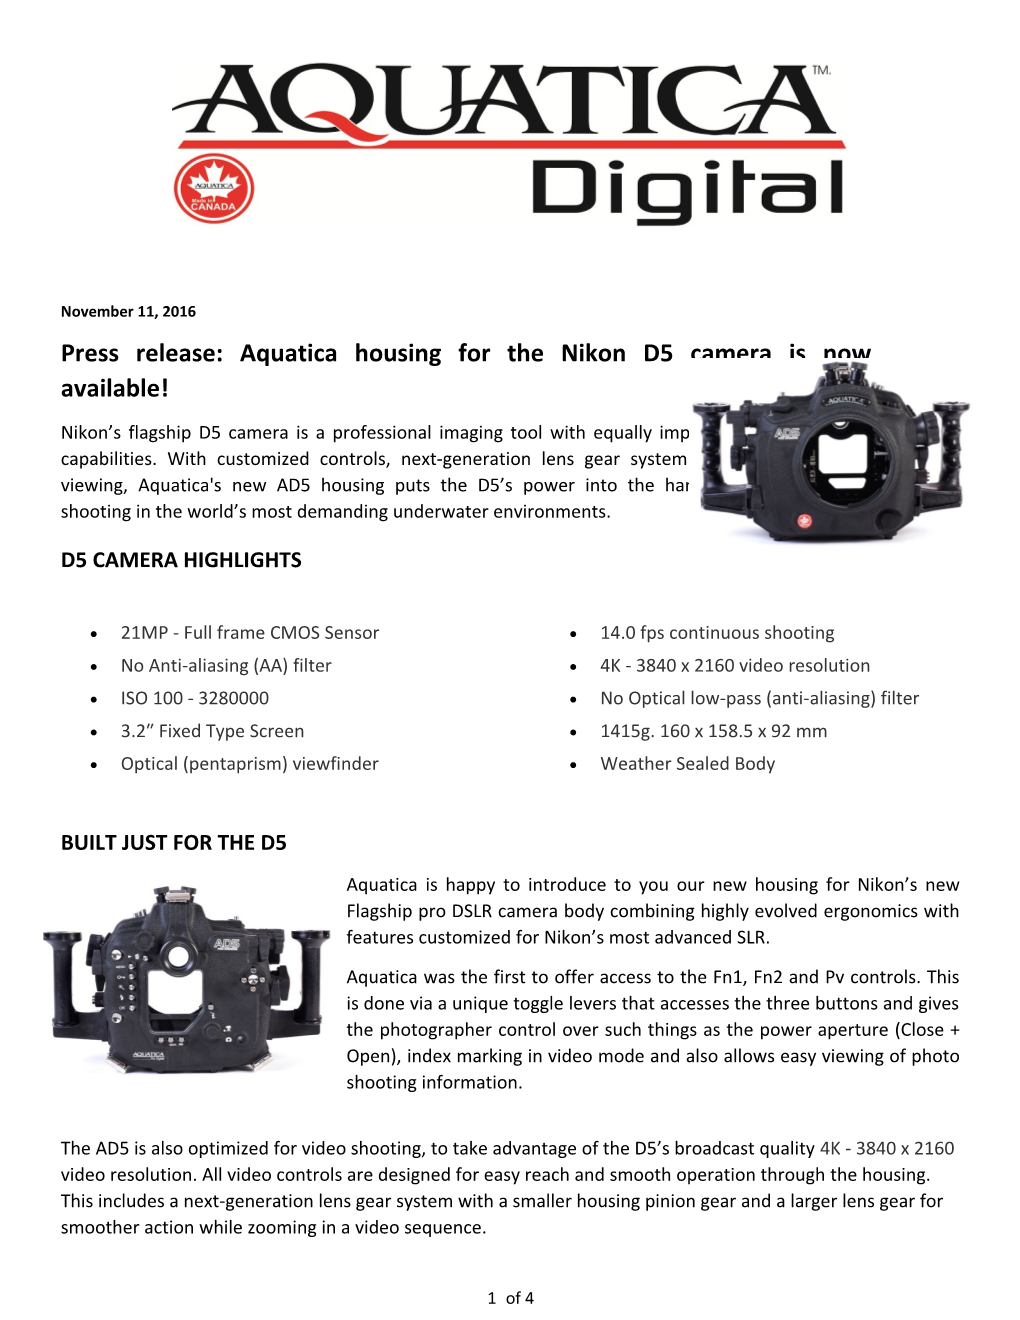 Press Release: Aquatica Housing for the Nikon D5 Camera Is Now Available!